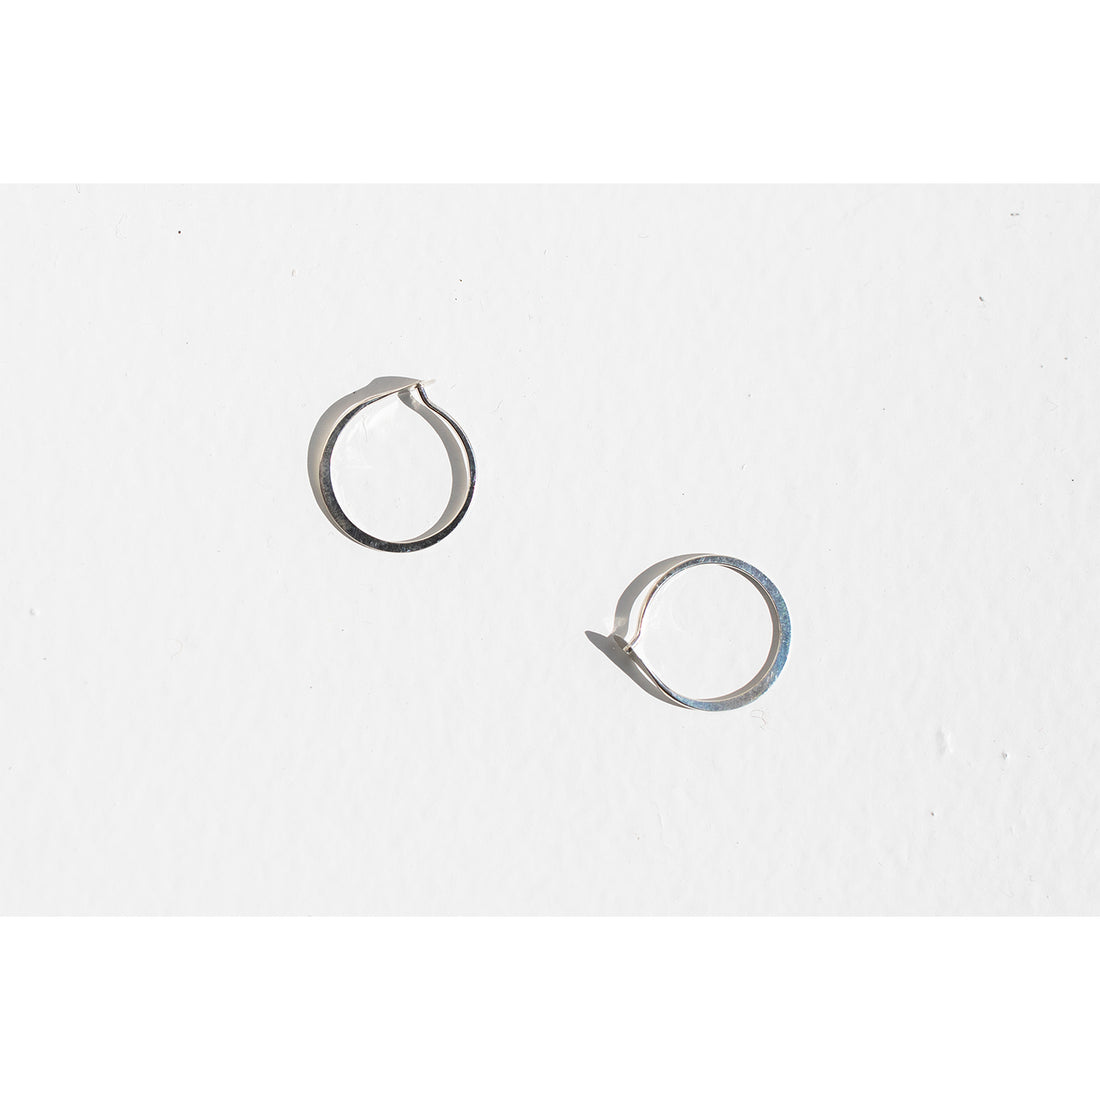 Melissa Joy Manning Small Forged Round Hoops in Sterling Silver